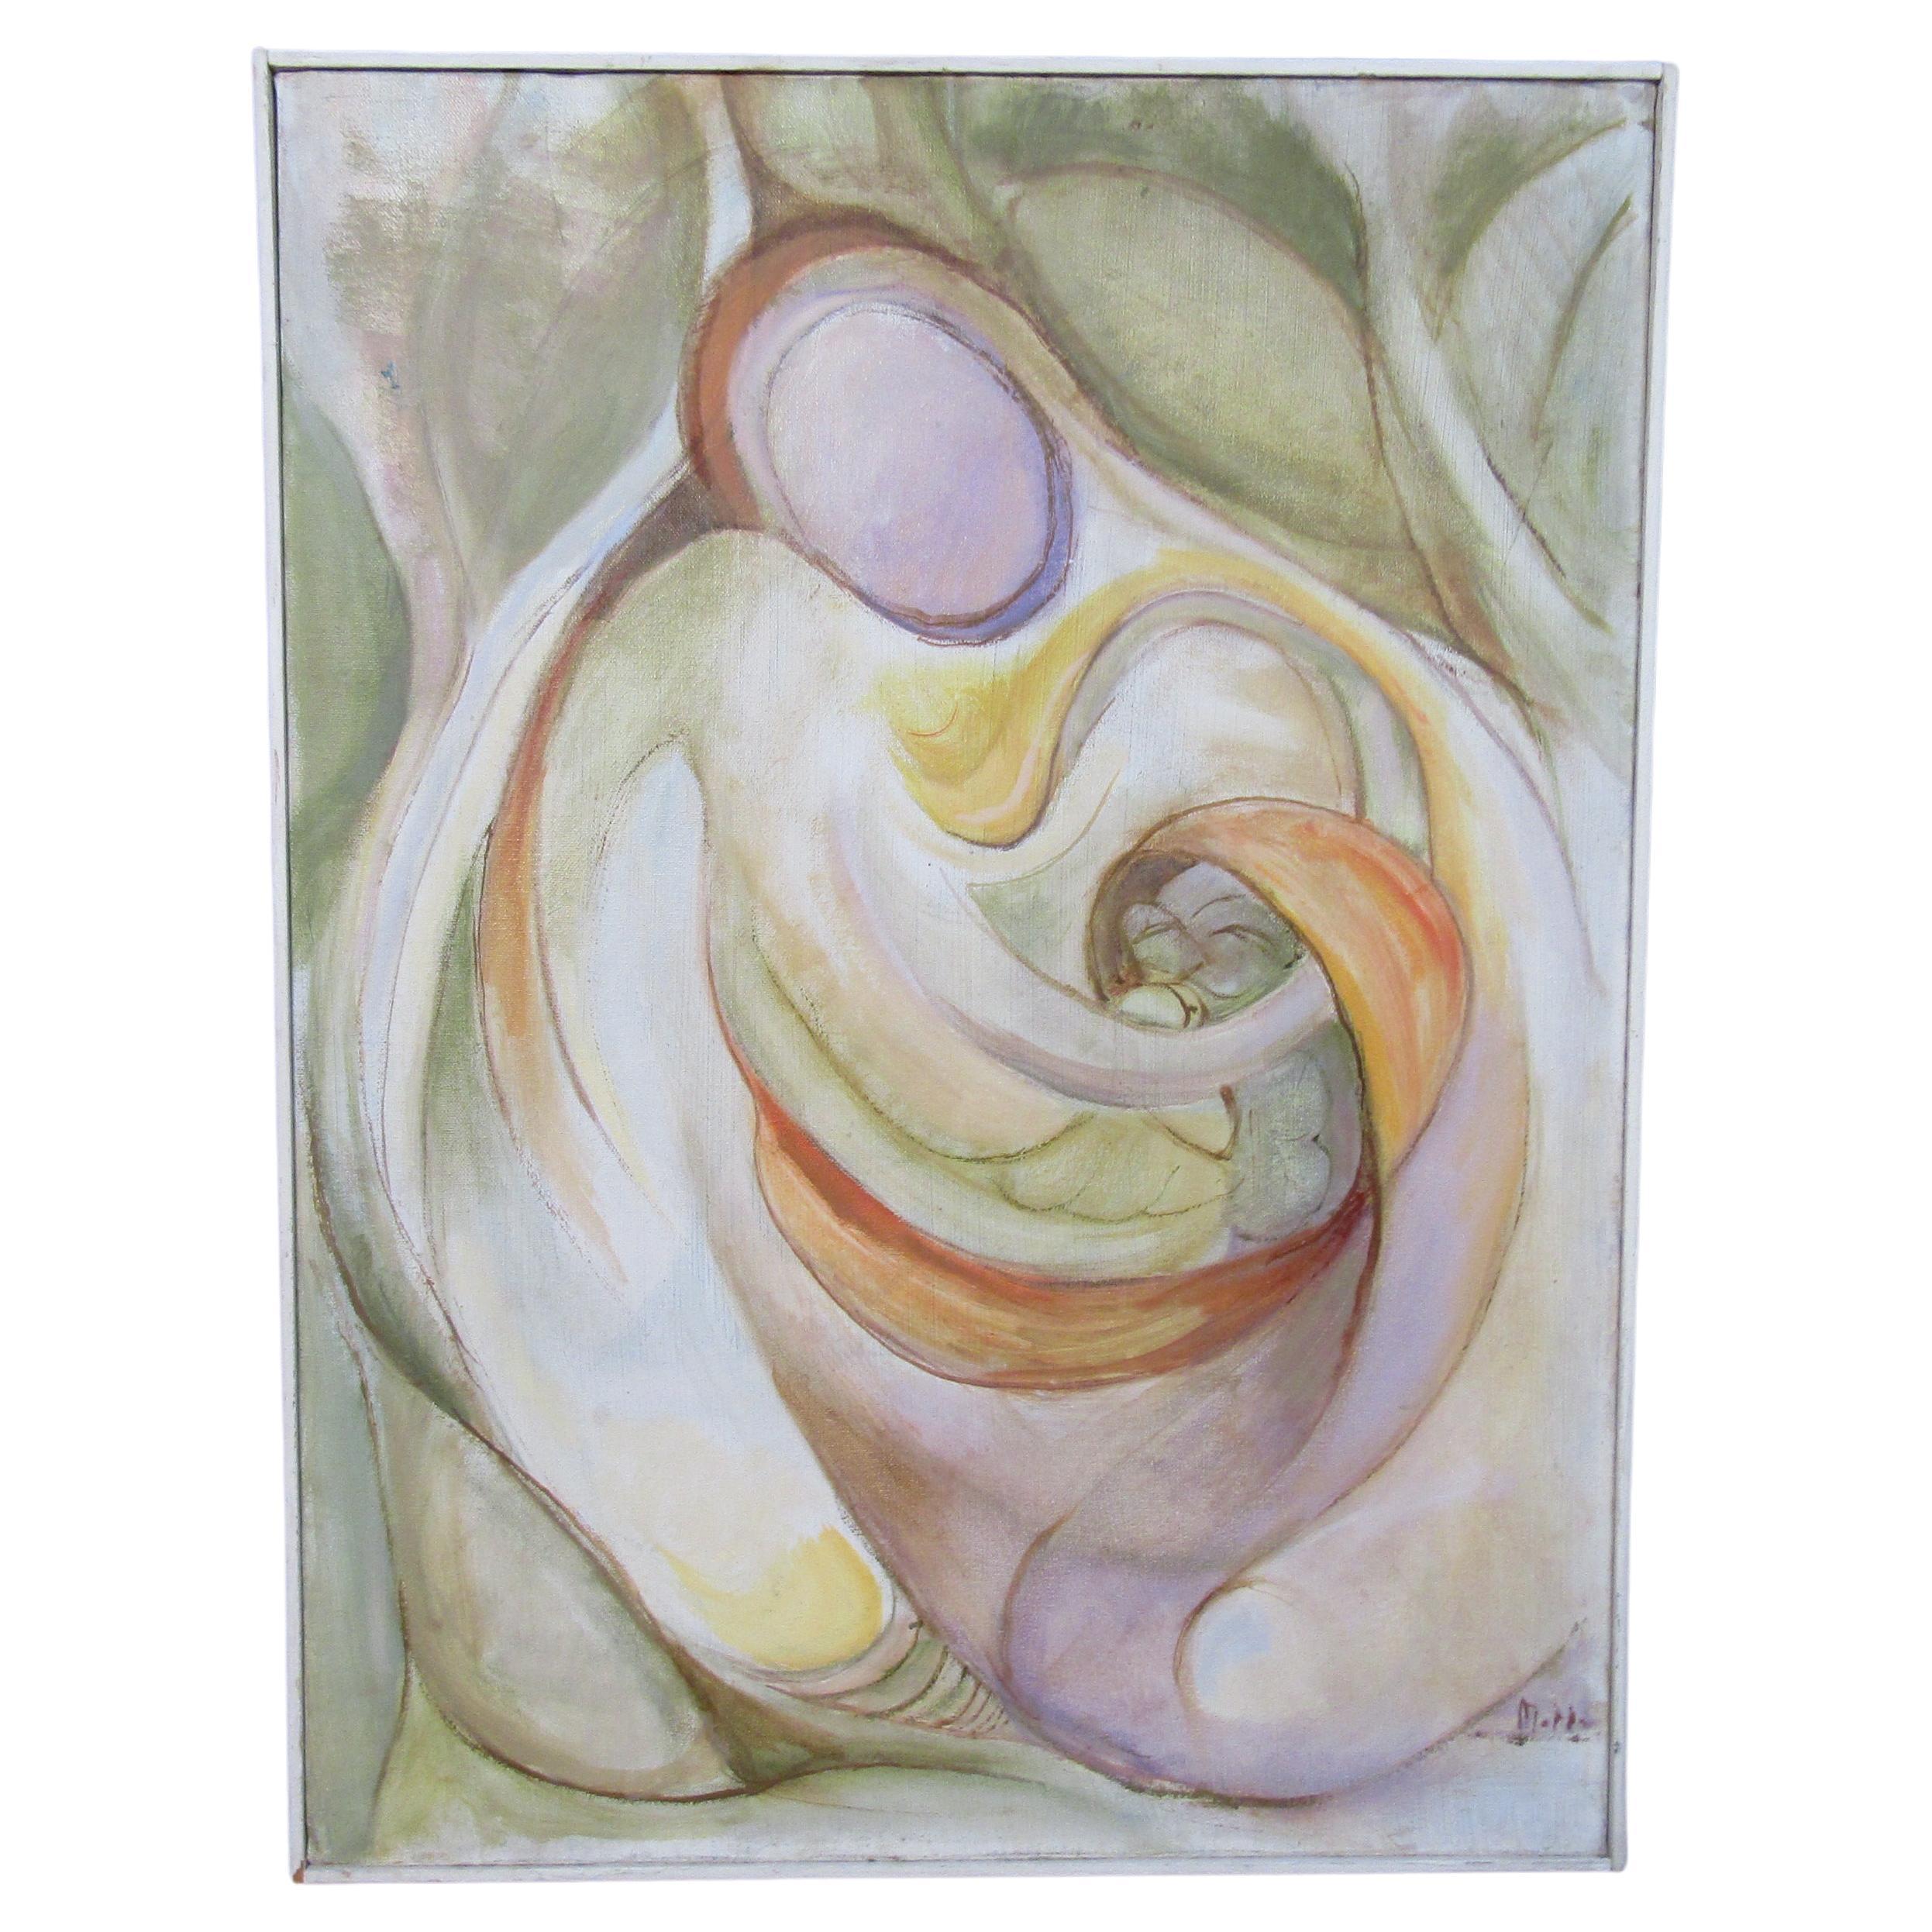 Abstract Swirling Figure Painting